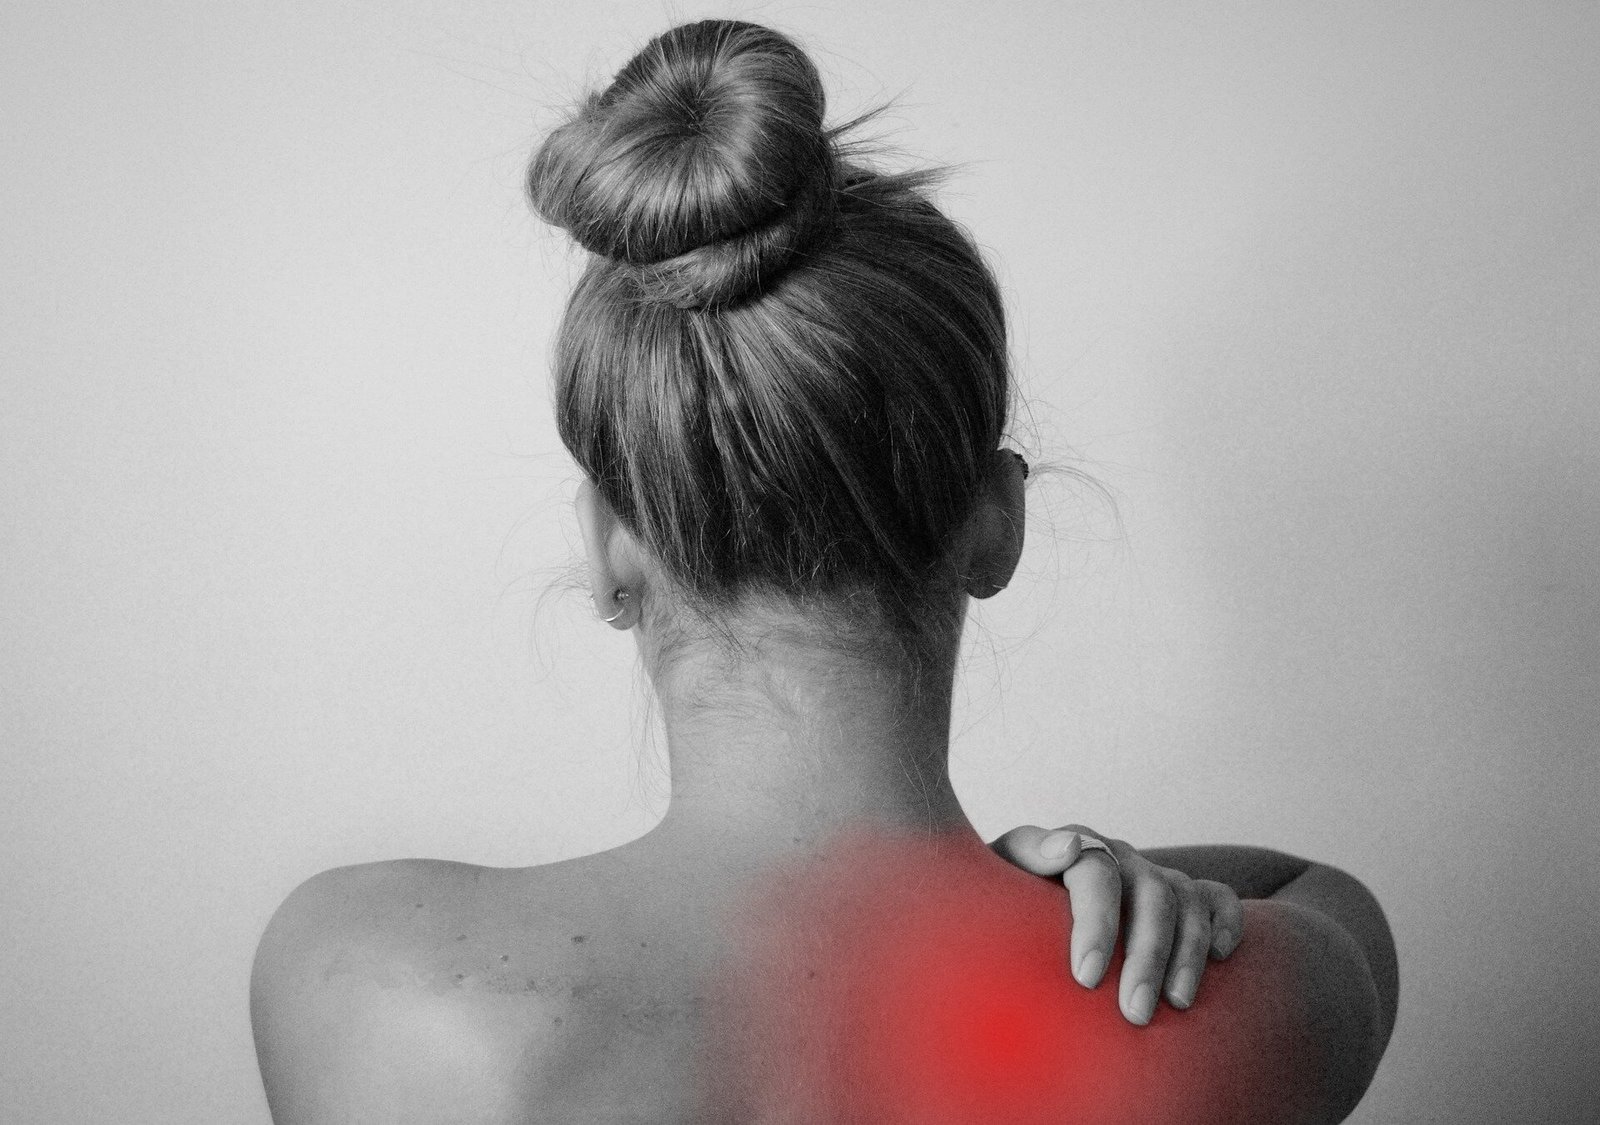 No benefit of physiotherapy over general advice after dislocated shoulder Clinical trial